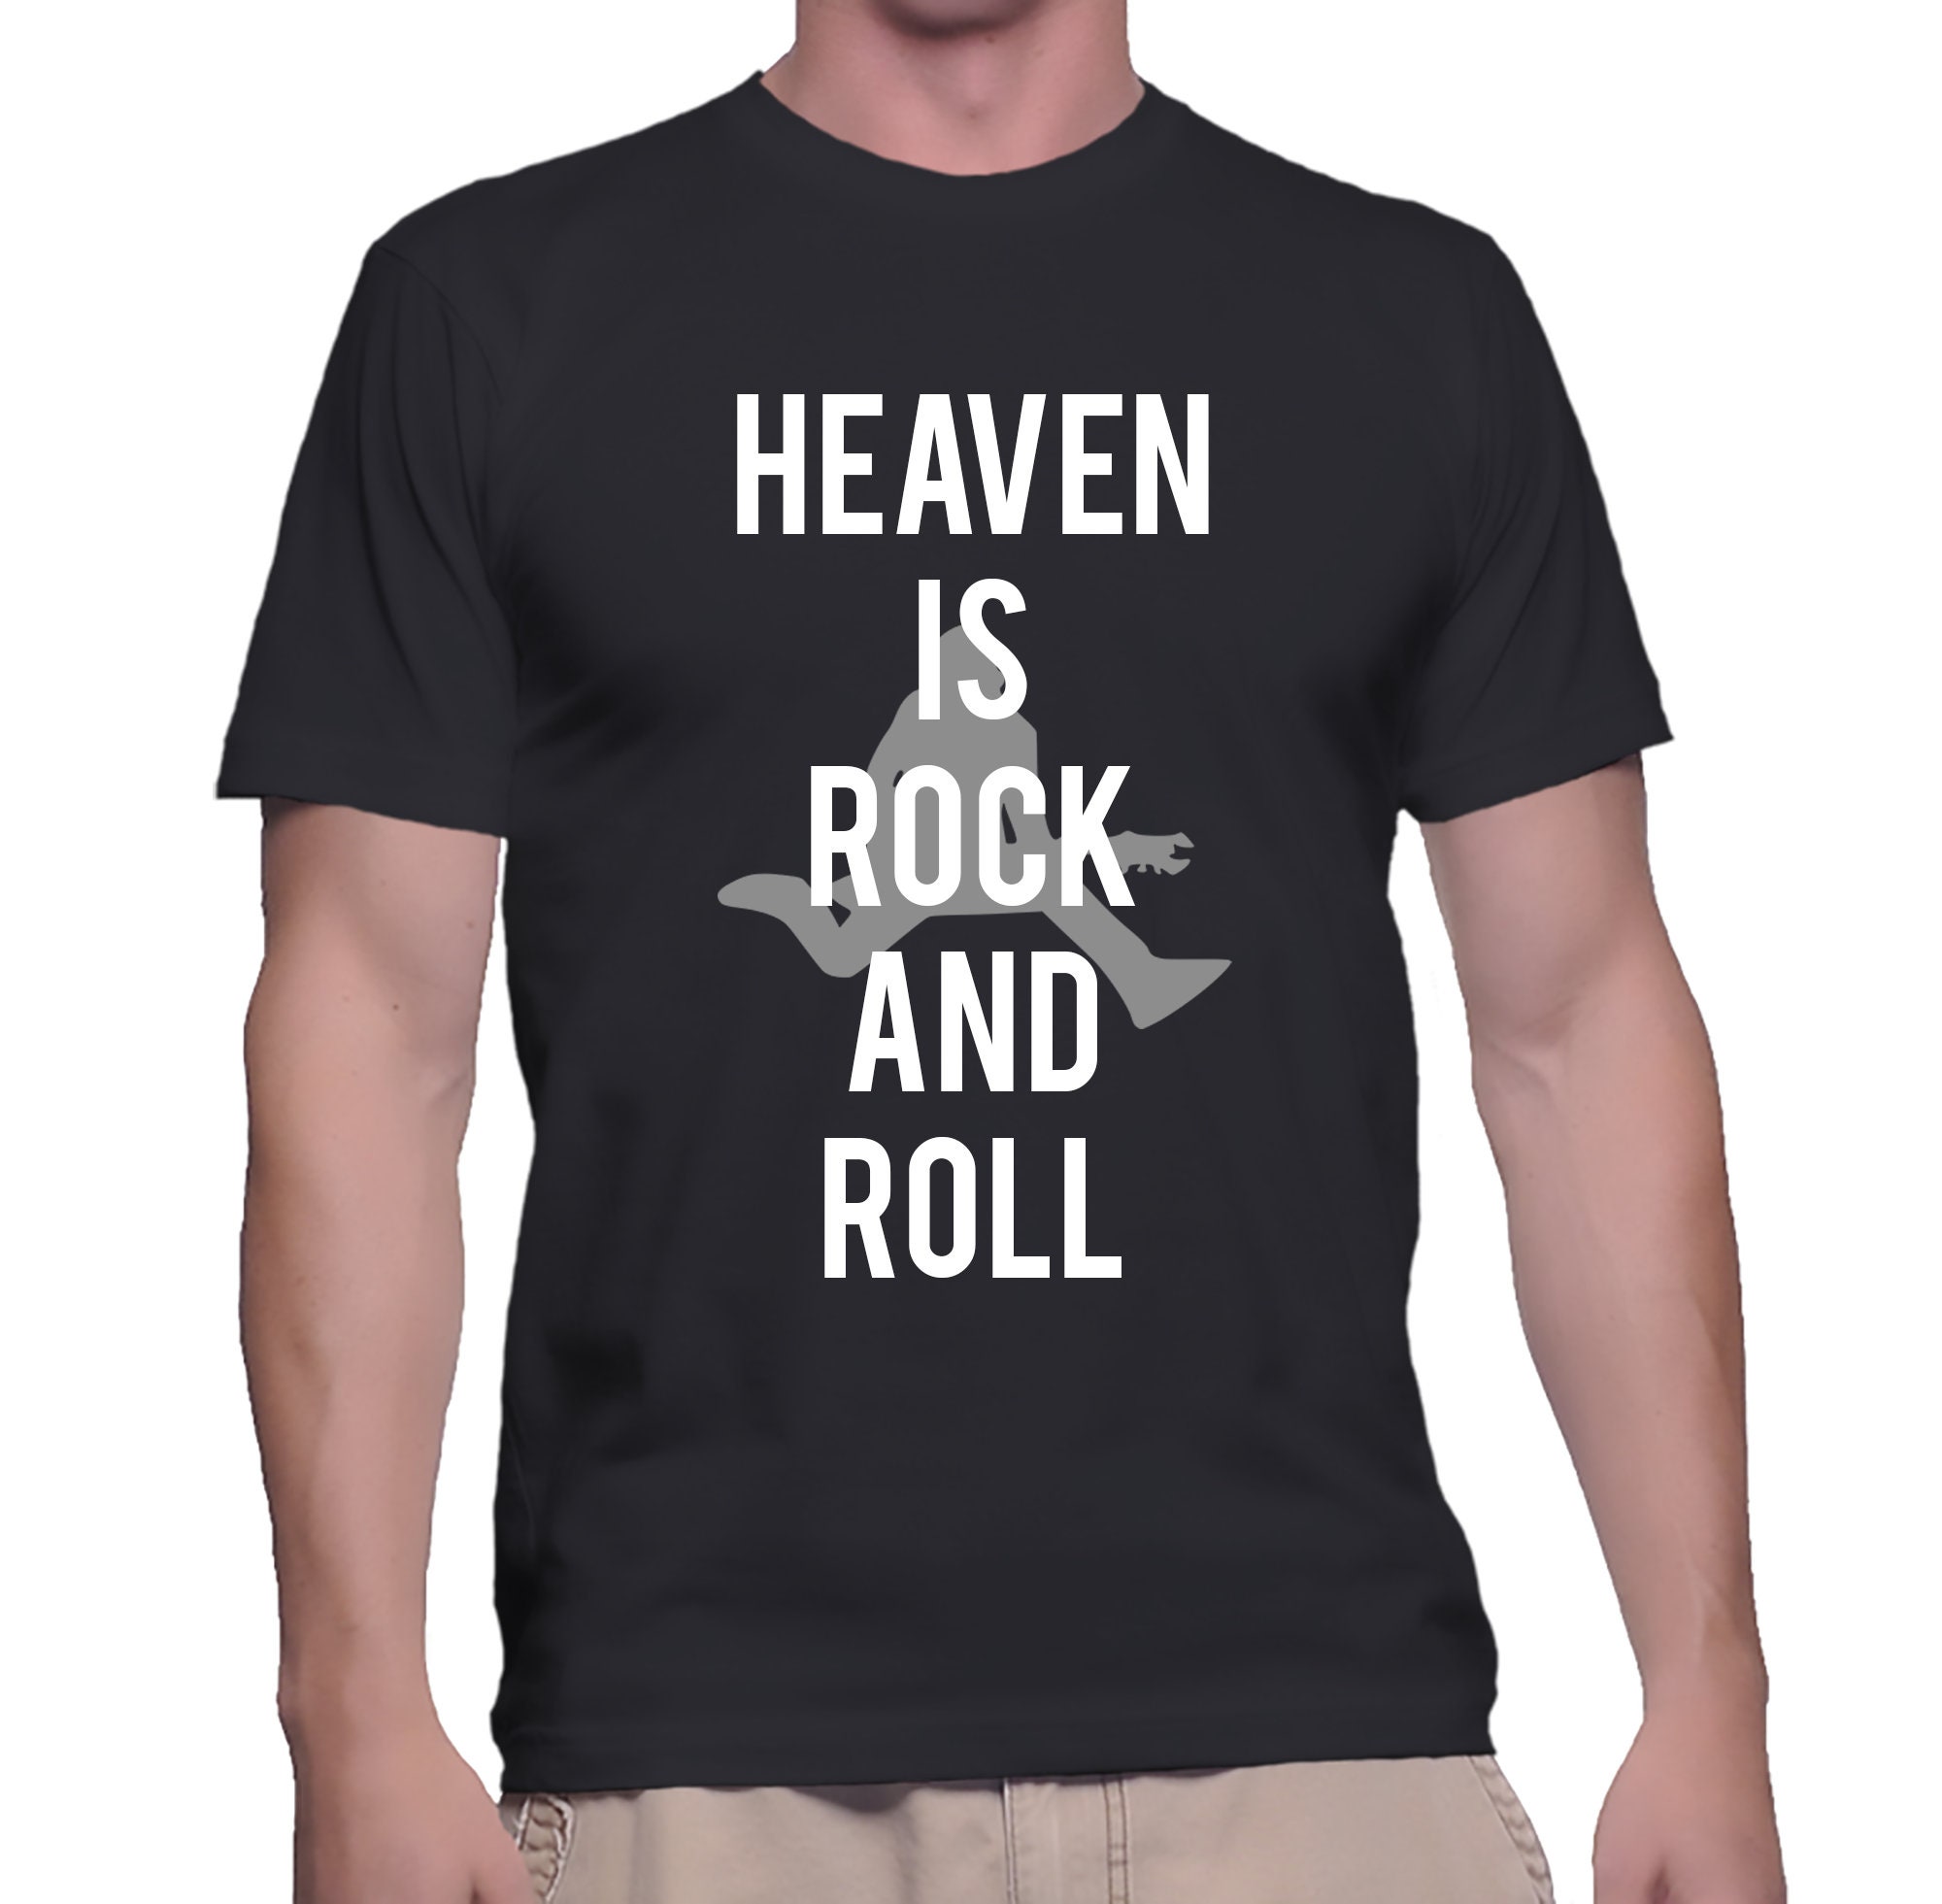 Discover Heaven is Rock And Roll T-shirt, Rock Fans T-Shirt